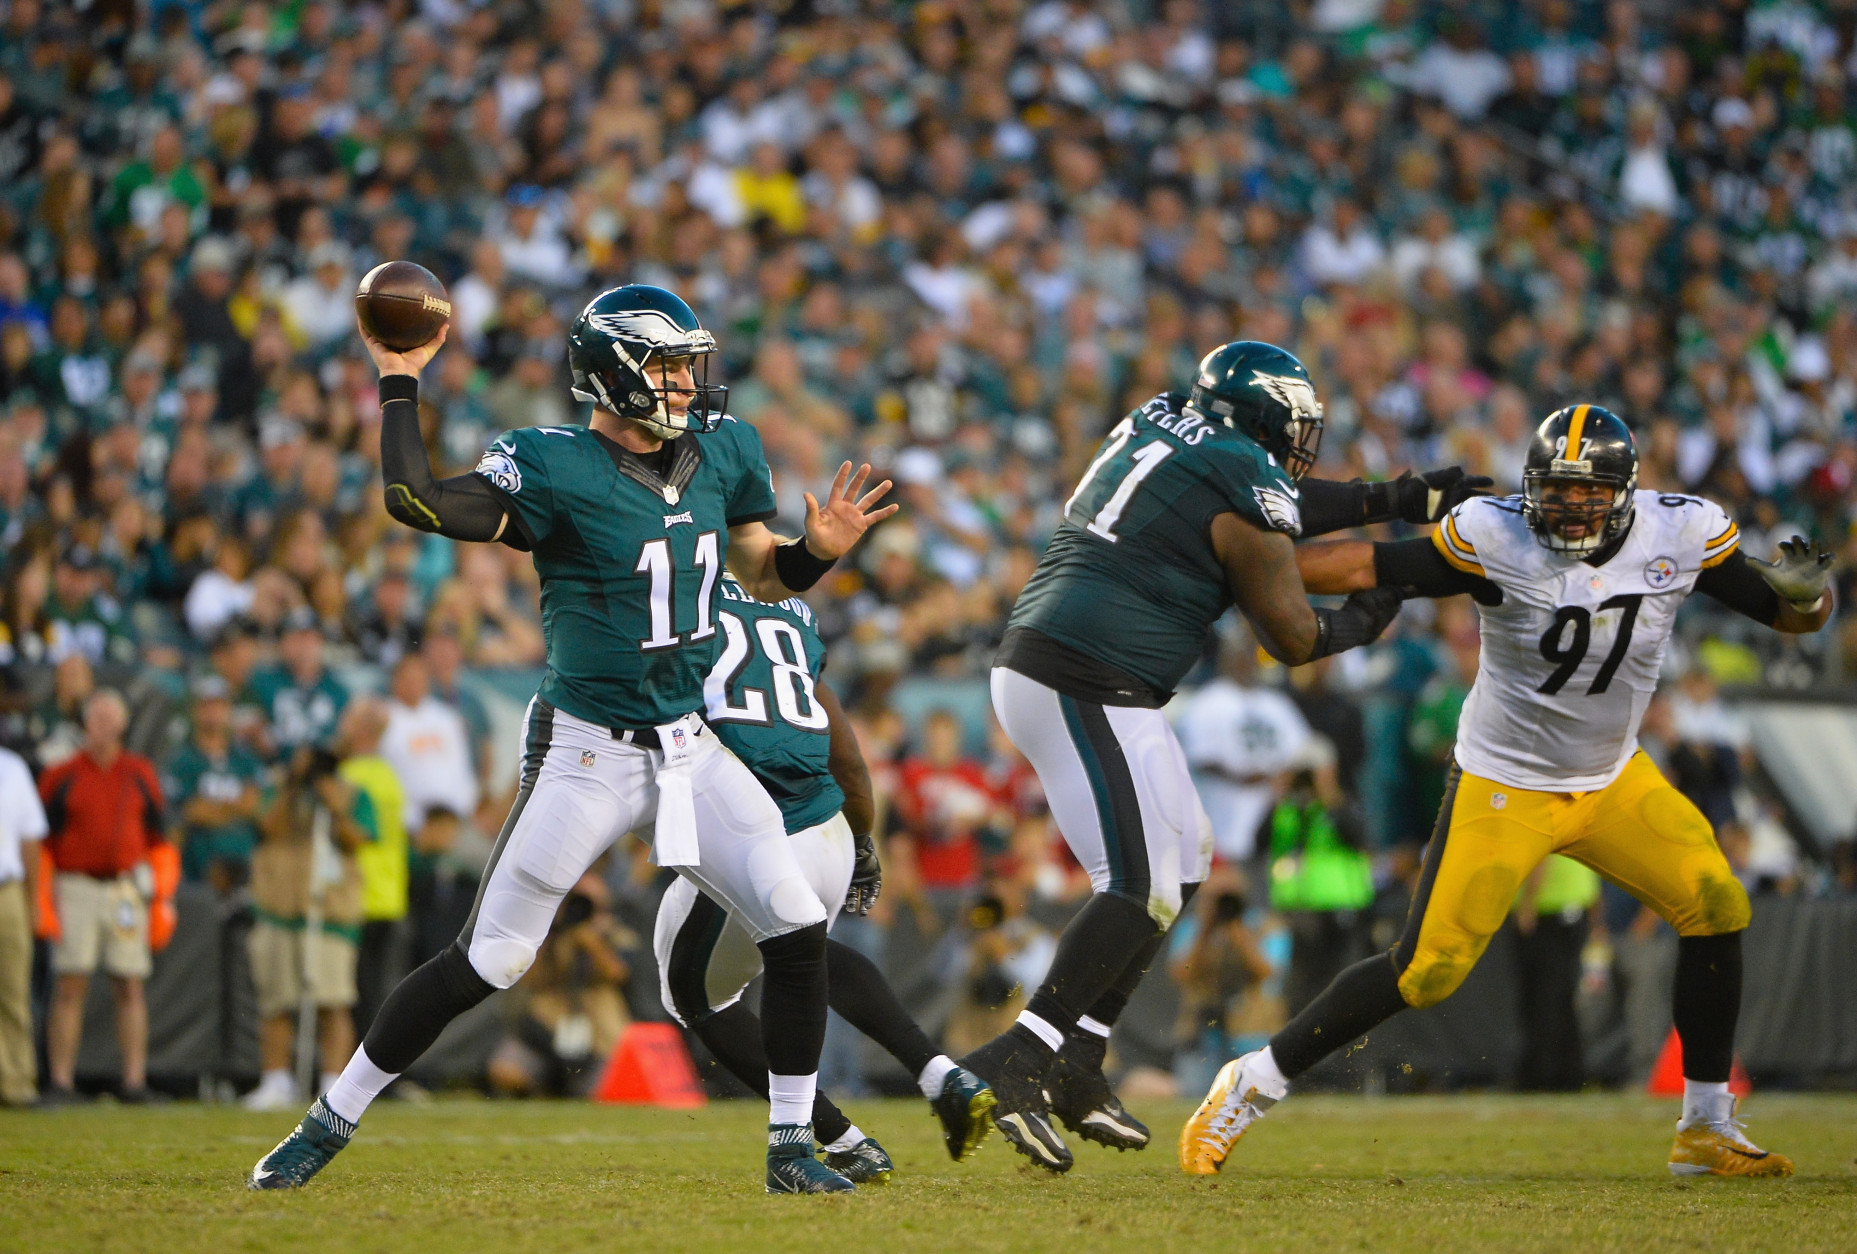 PHILADELPHIA, PA - SEPTEMBER 25:   Quarterback Carson Wentz #11 of the Philadelphia Eagles looks to pass against the Pittsburgh Steelers in the fourth quarter at Lincoln Financial Field on September 25, 2016 in Philadelphia, Pennsylvania.  (Photo by Alex Goodlett/Getty Images)